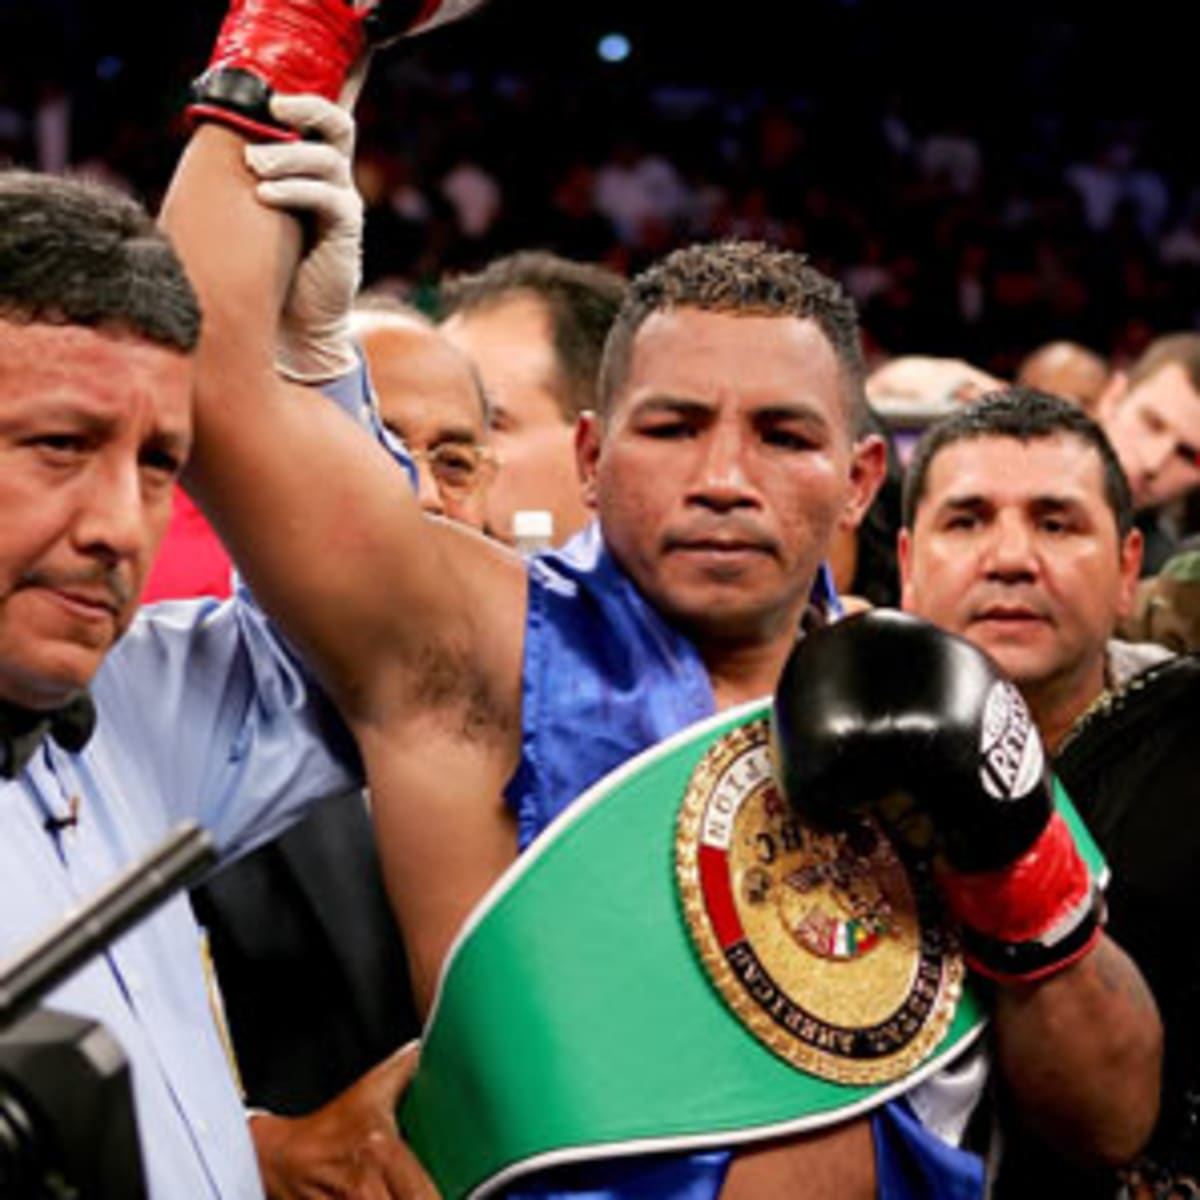 Mayorga, master of smack, talks big before bout with Mosley pic